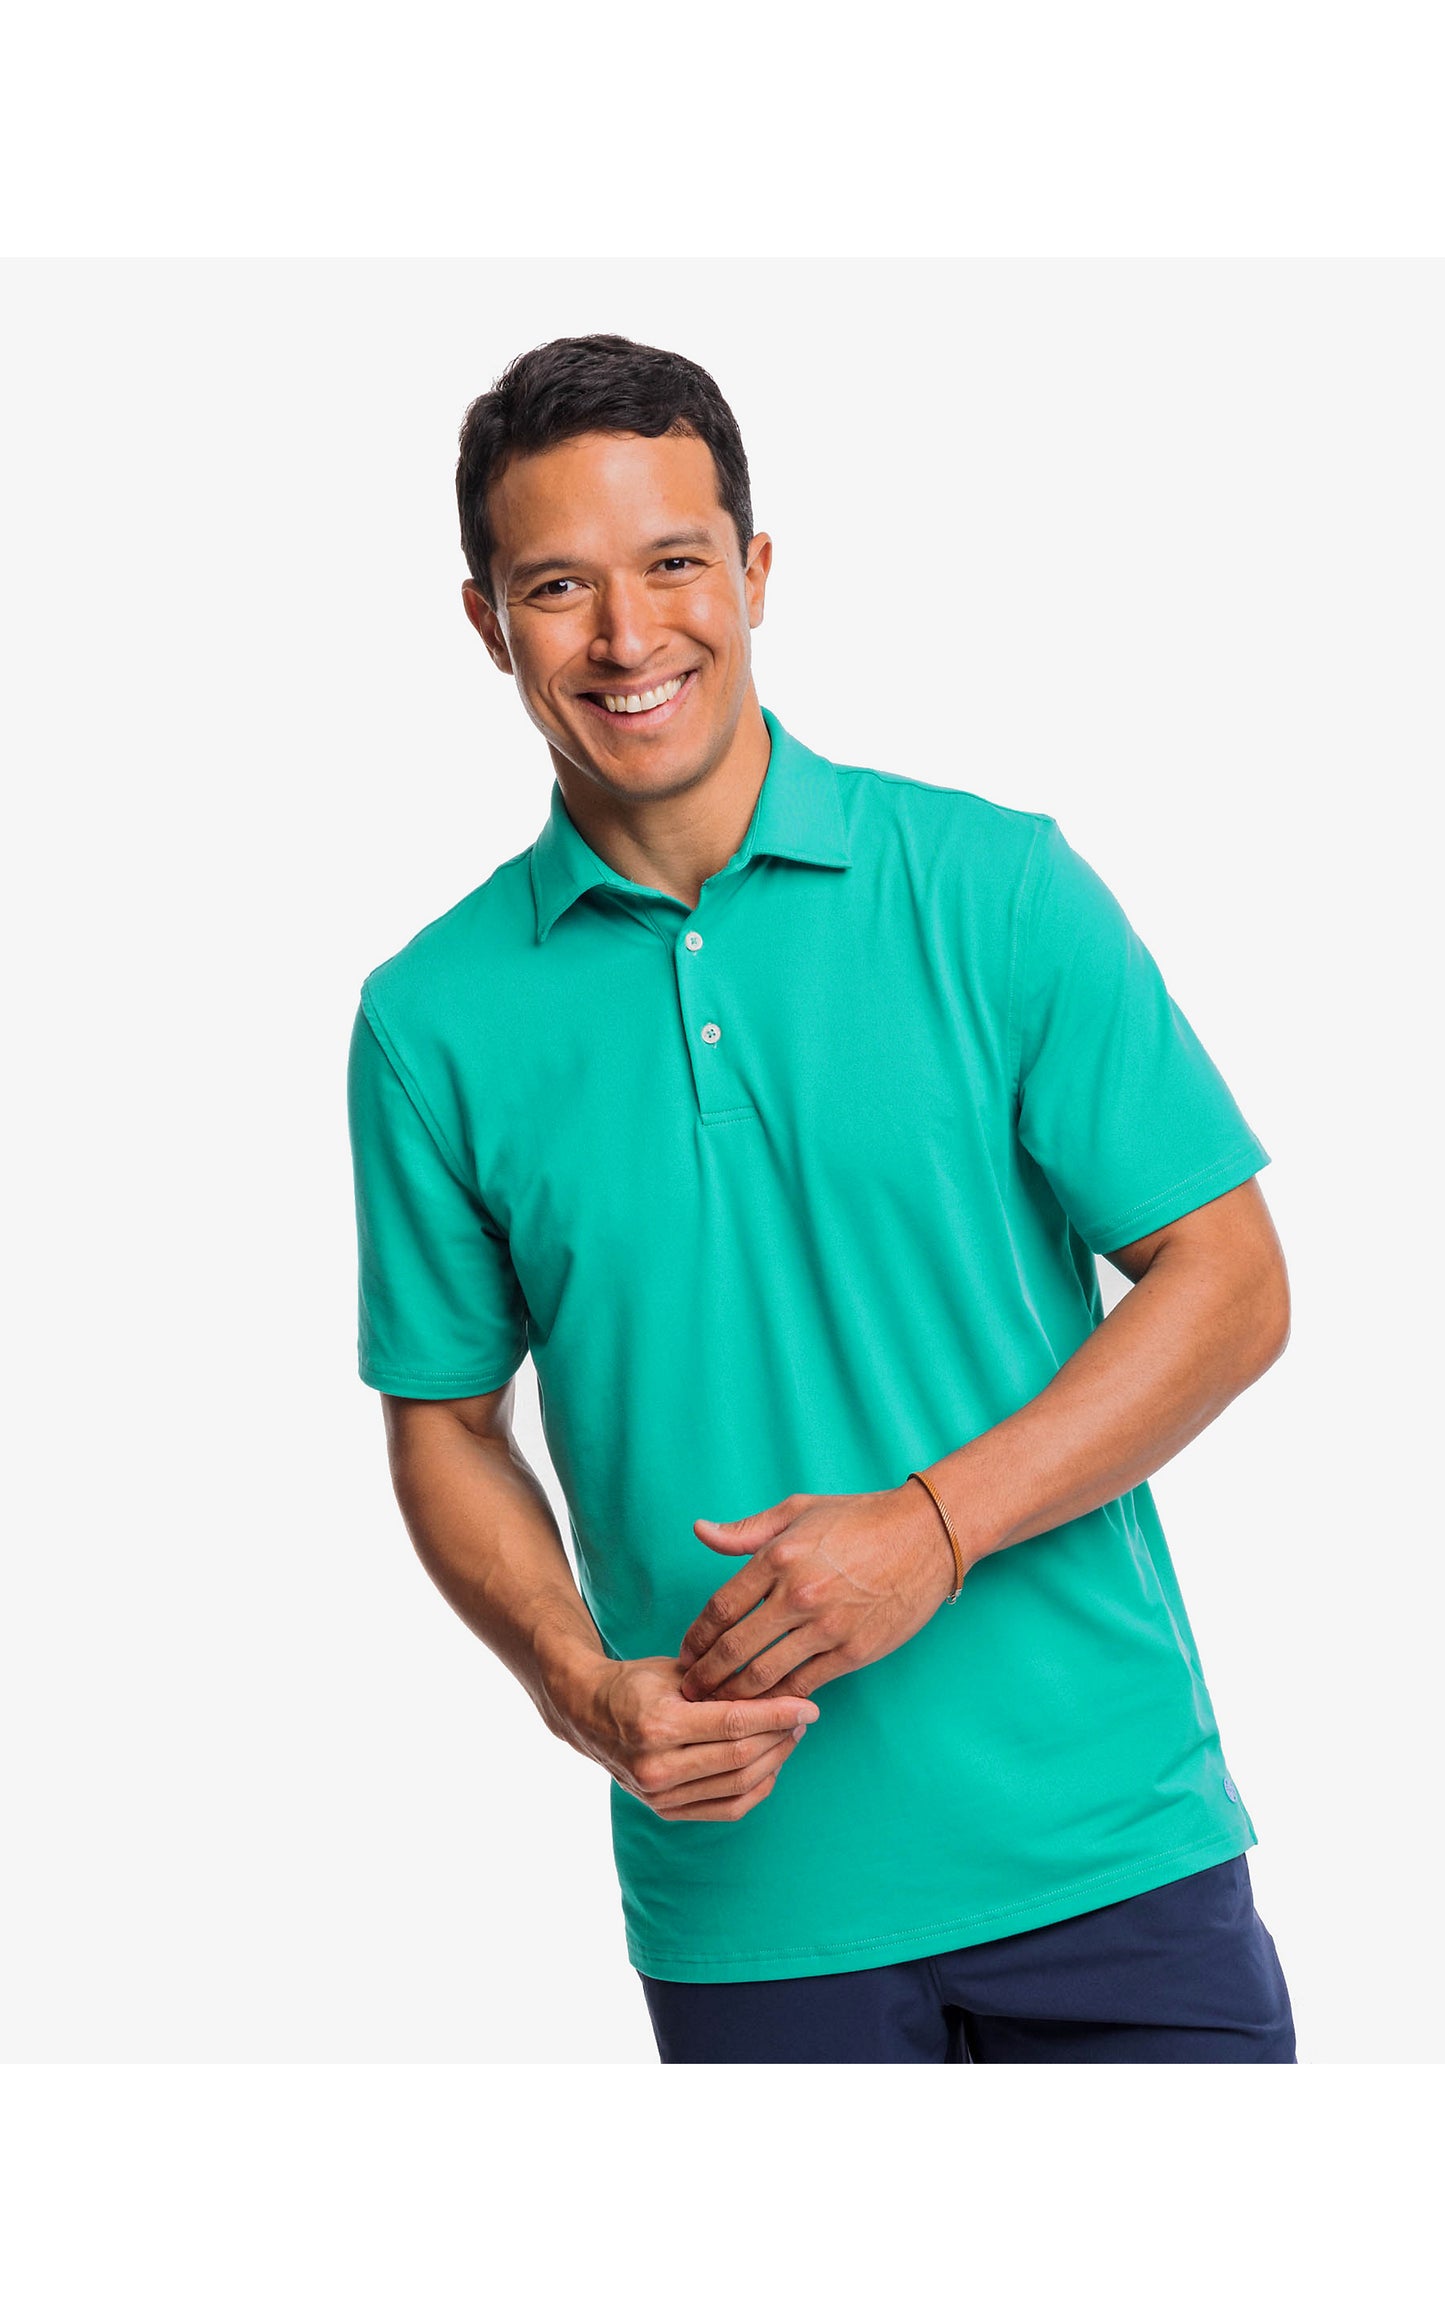 Men's Ryder Polo - Water Lilly Green